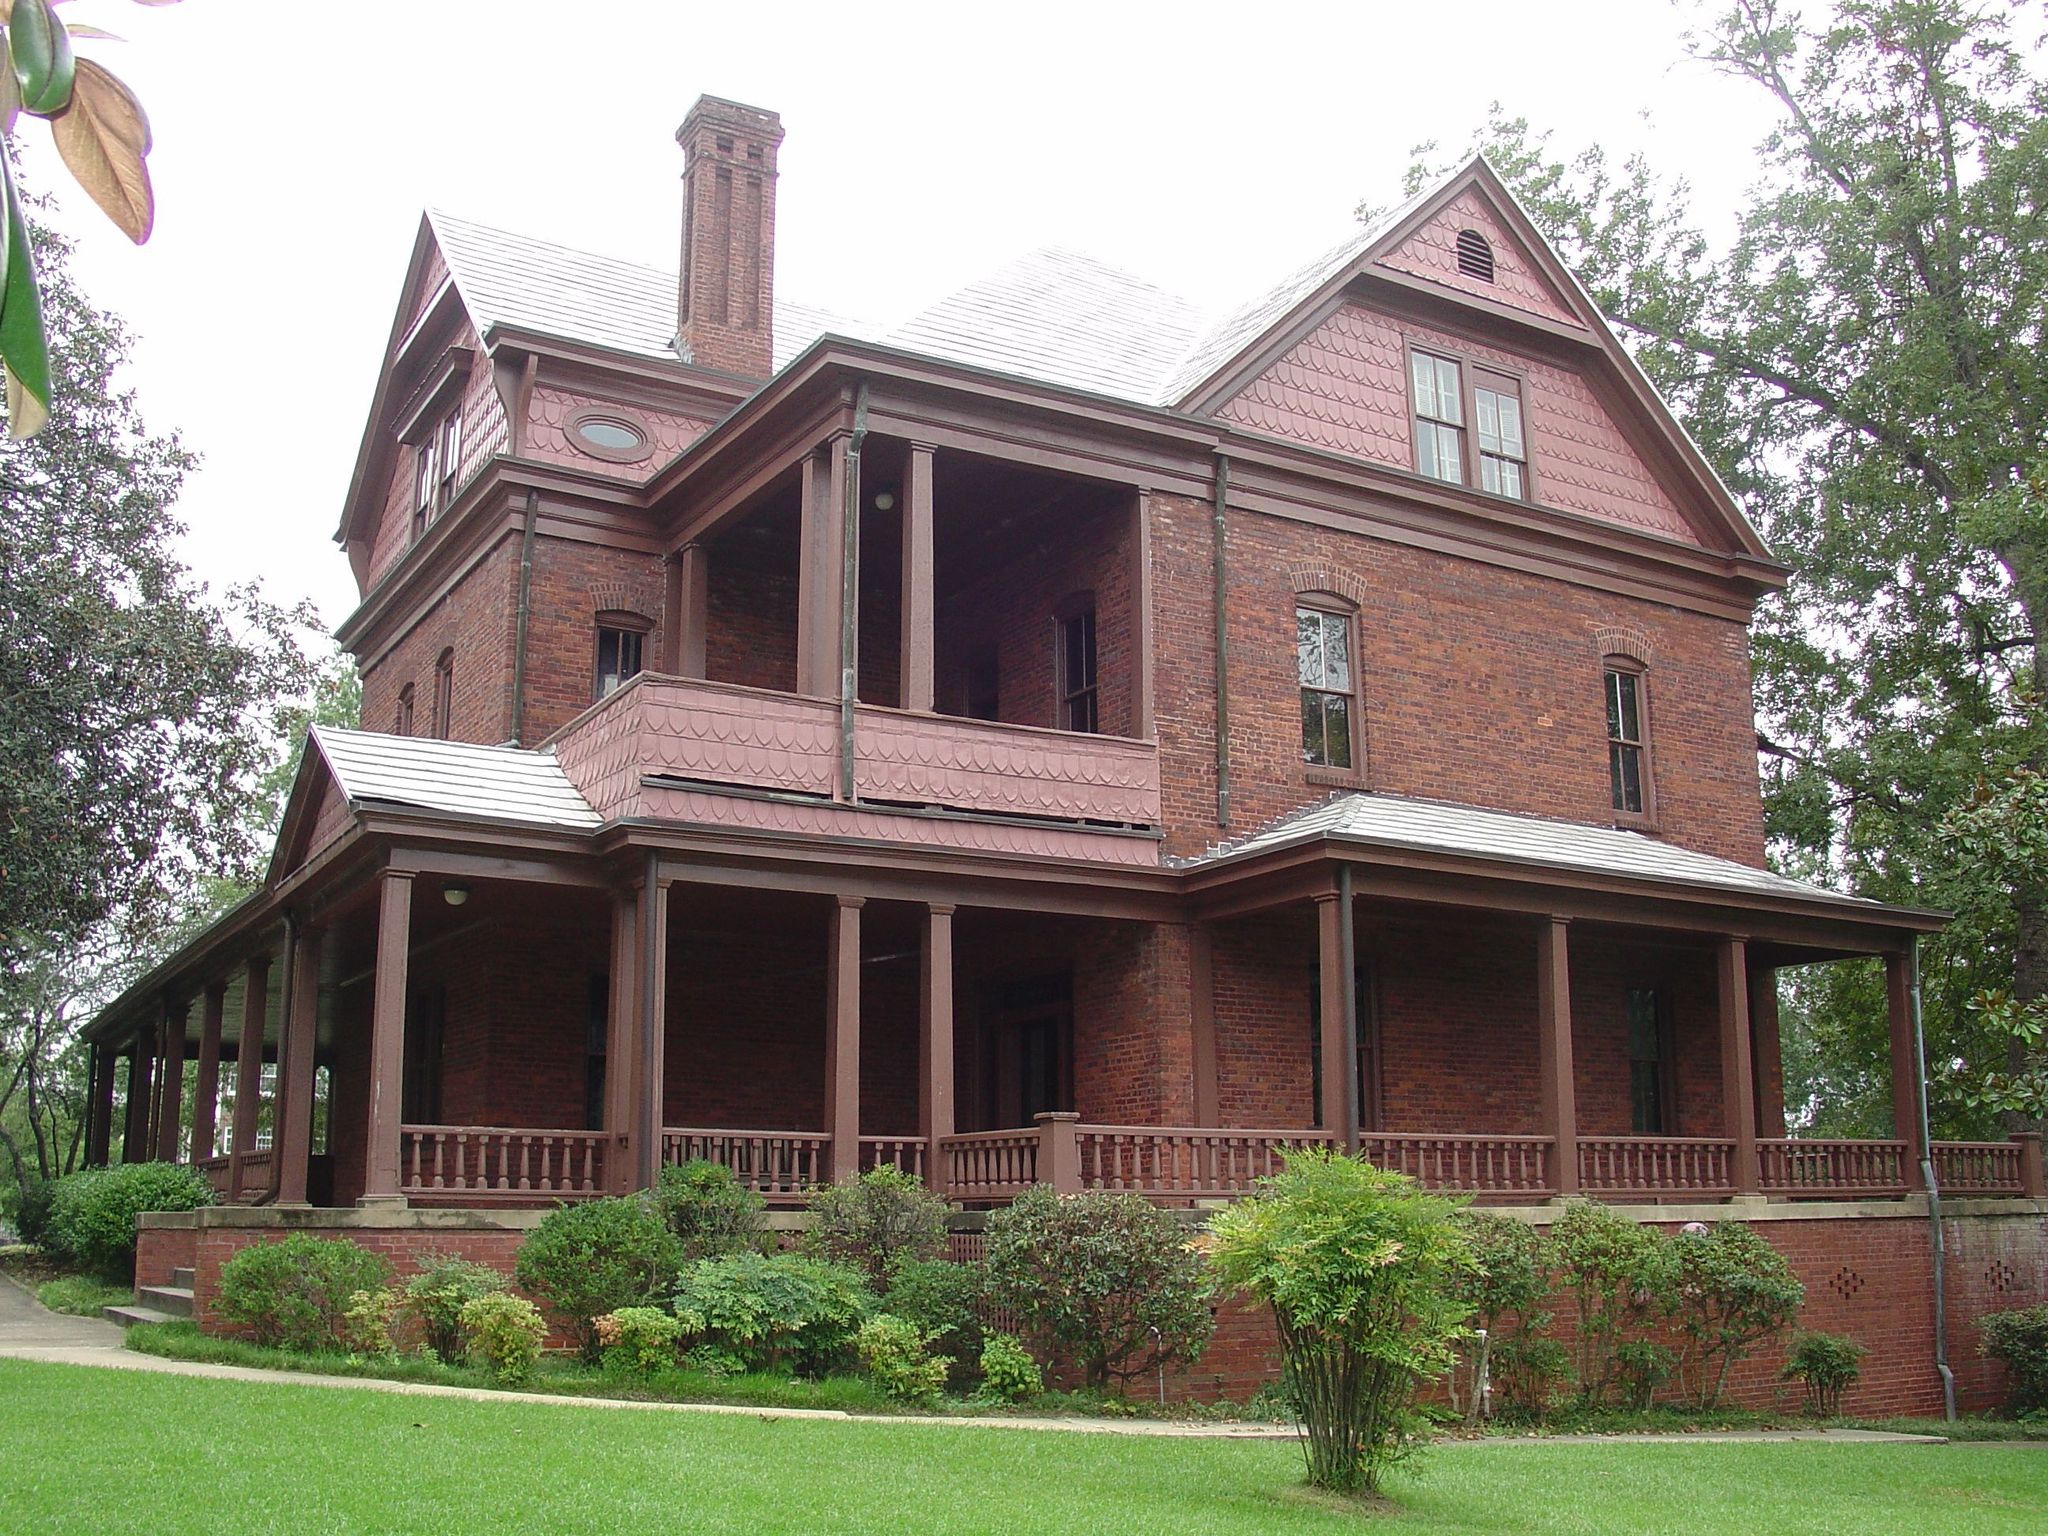 This house, like Washington himself, was a lesson plan to both students and benefactors of Tuskegee Institute.